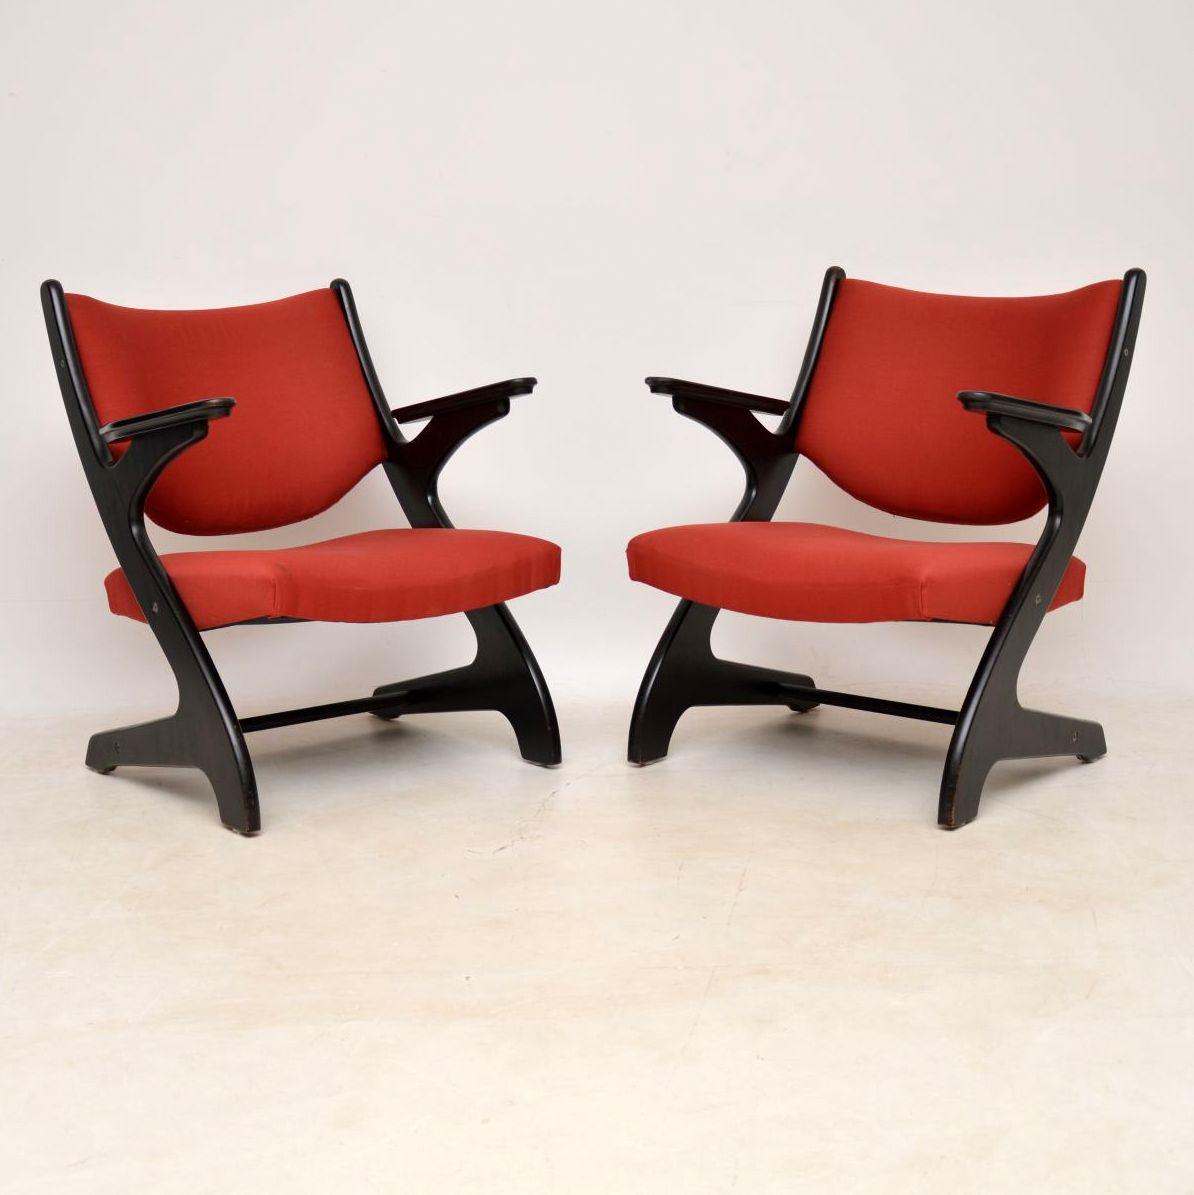 A very stylish and extremely comfortable pair of vintage Italian armchairs, these date from circa 1960s-1970s. They have a stunning shape, with ebonized wood frames, the condition is very good for their age. The frames are all clean, sturdy and